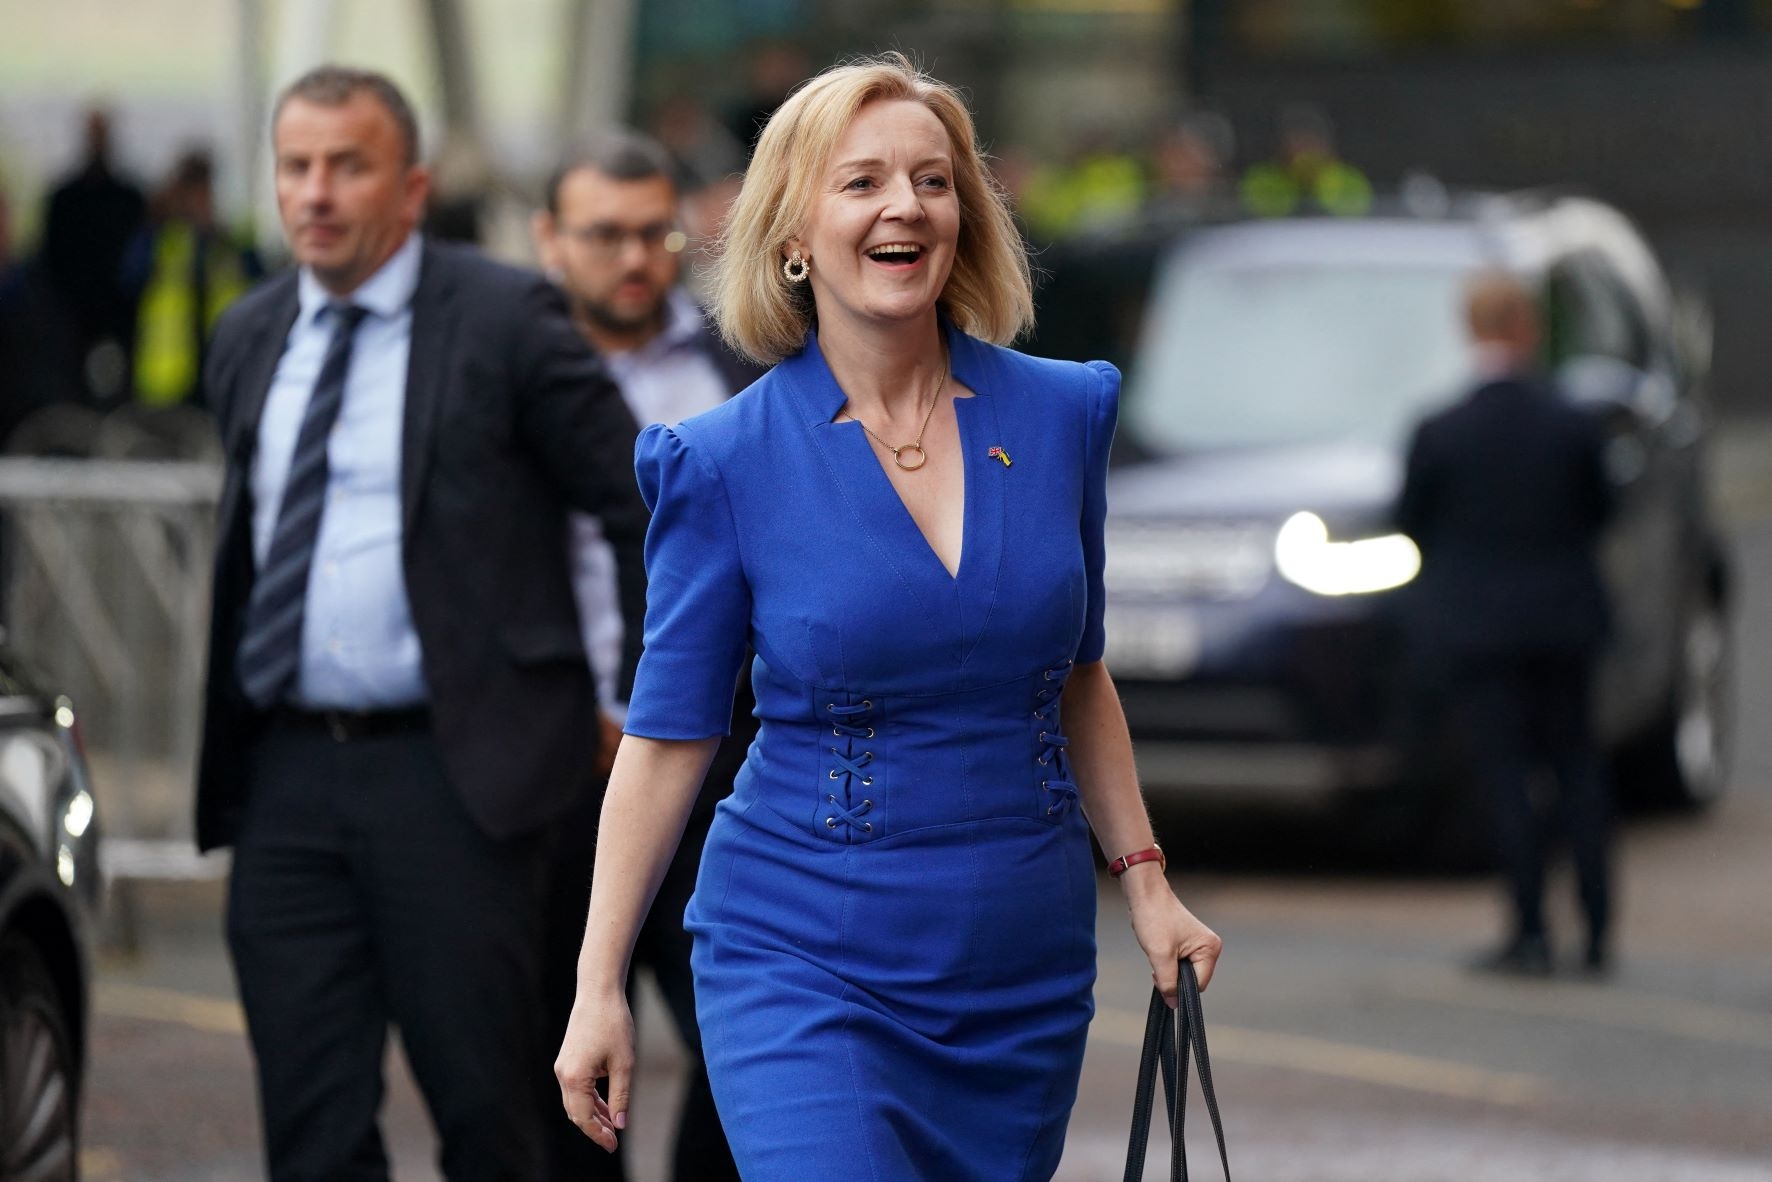 Liz Truss, Britain's Foreign Secretary and contender to become the country's next prime minister, arrives to appear on the BBC's 'The UK's Next Prime Minister: The Debate' in Victoria Hall in Stoke-on-Trent, central England, on July 25, 2022 (AFP)